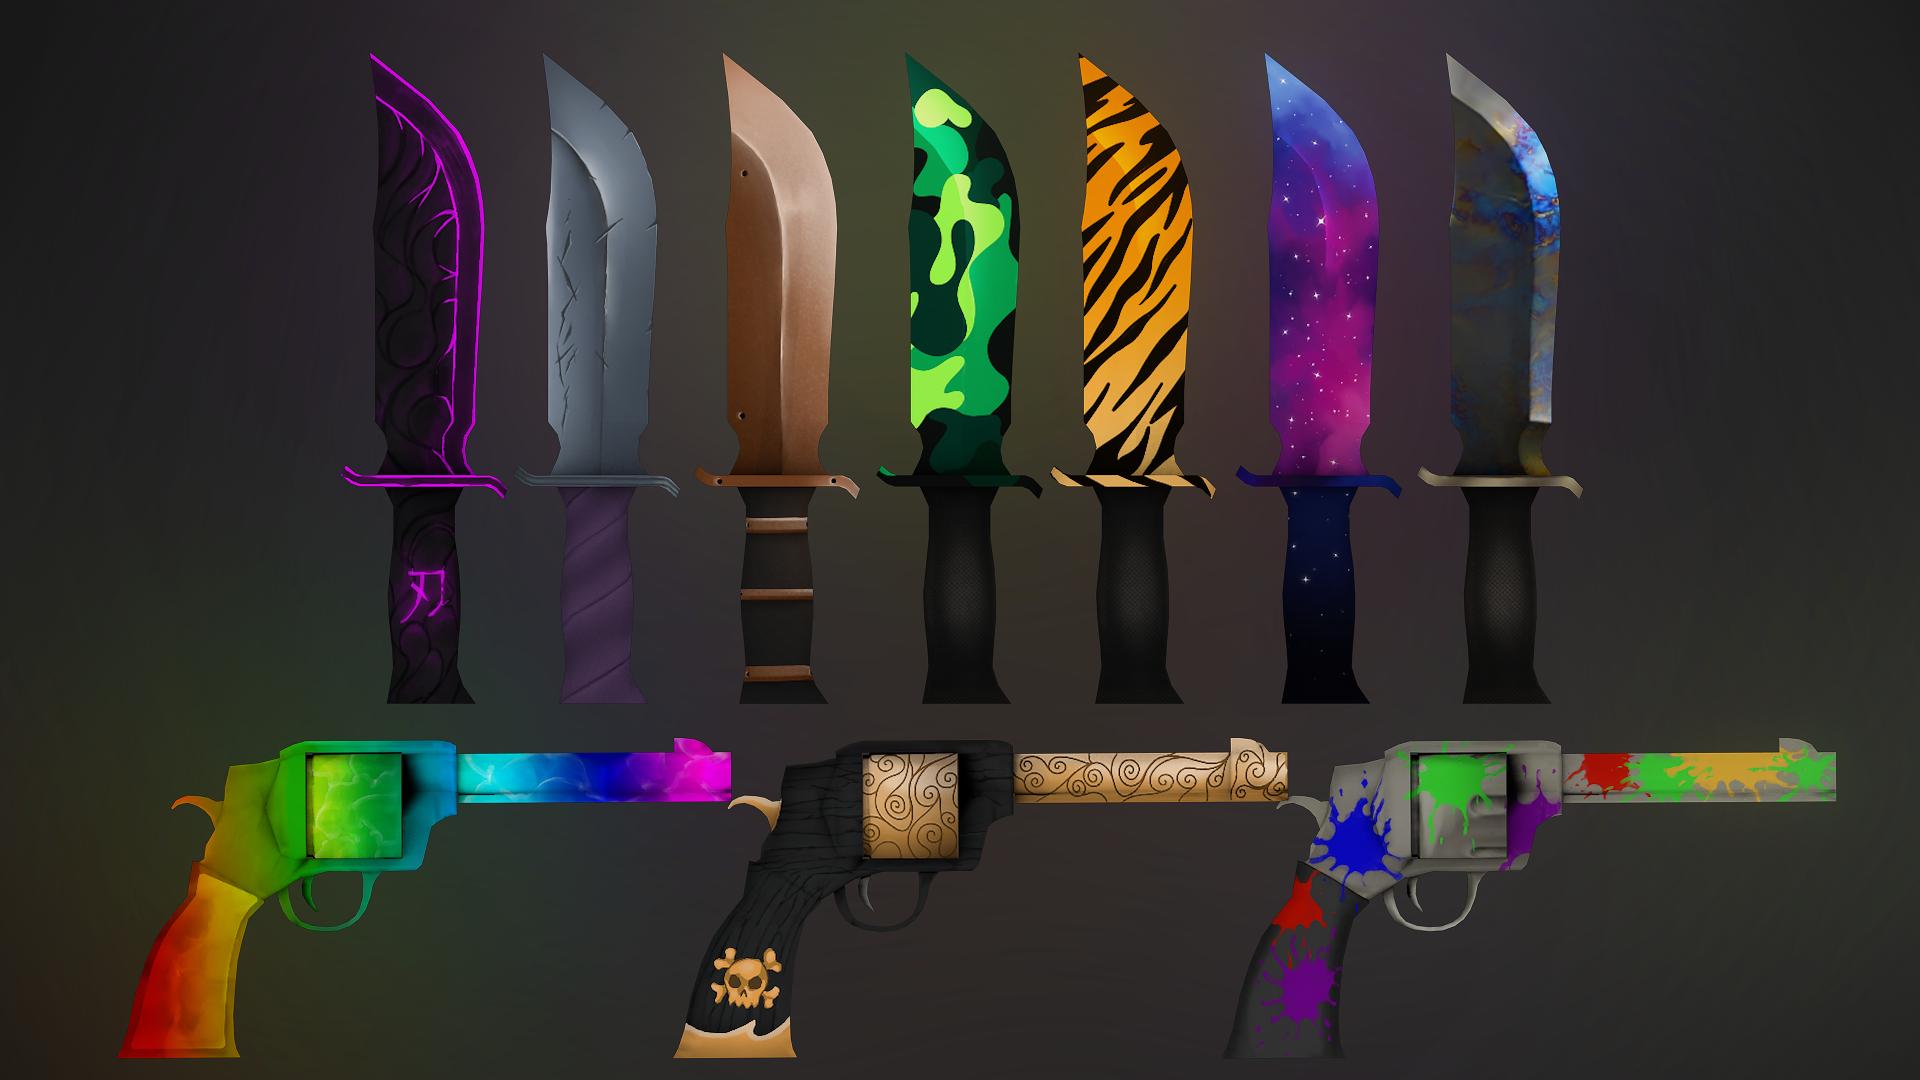 “Check out the new skins I made for Murder Mystery 2's latest updat...